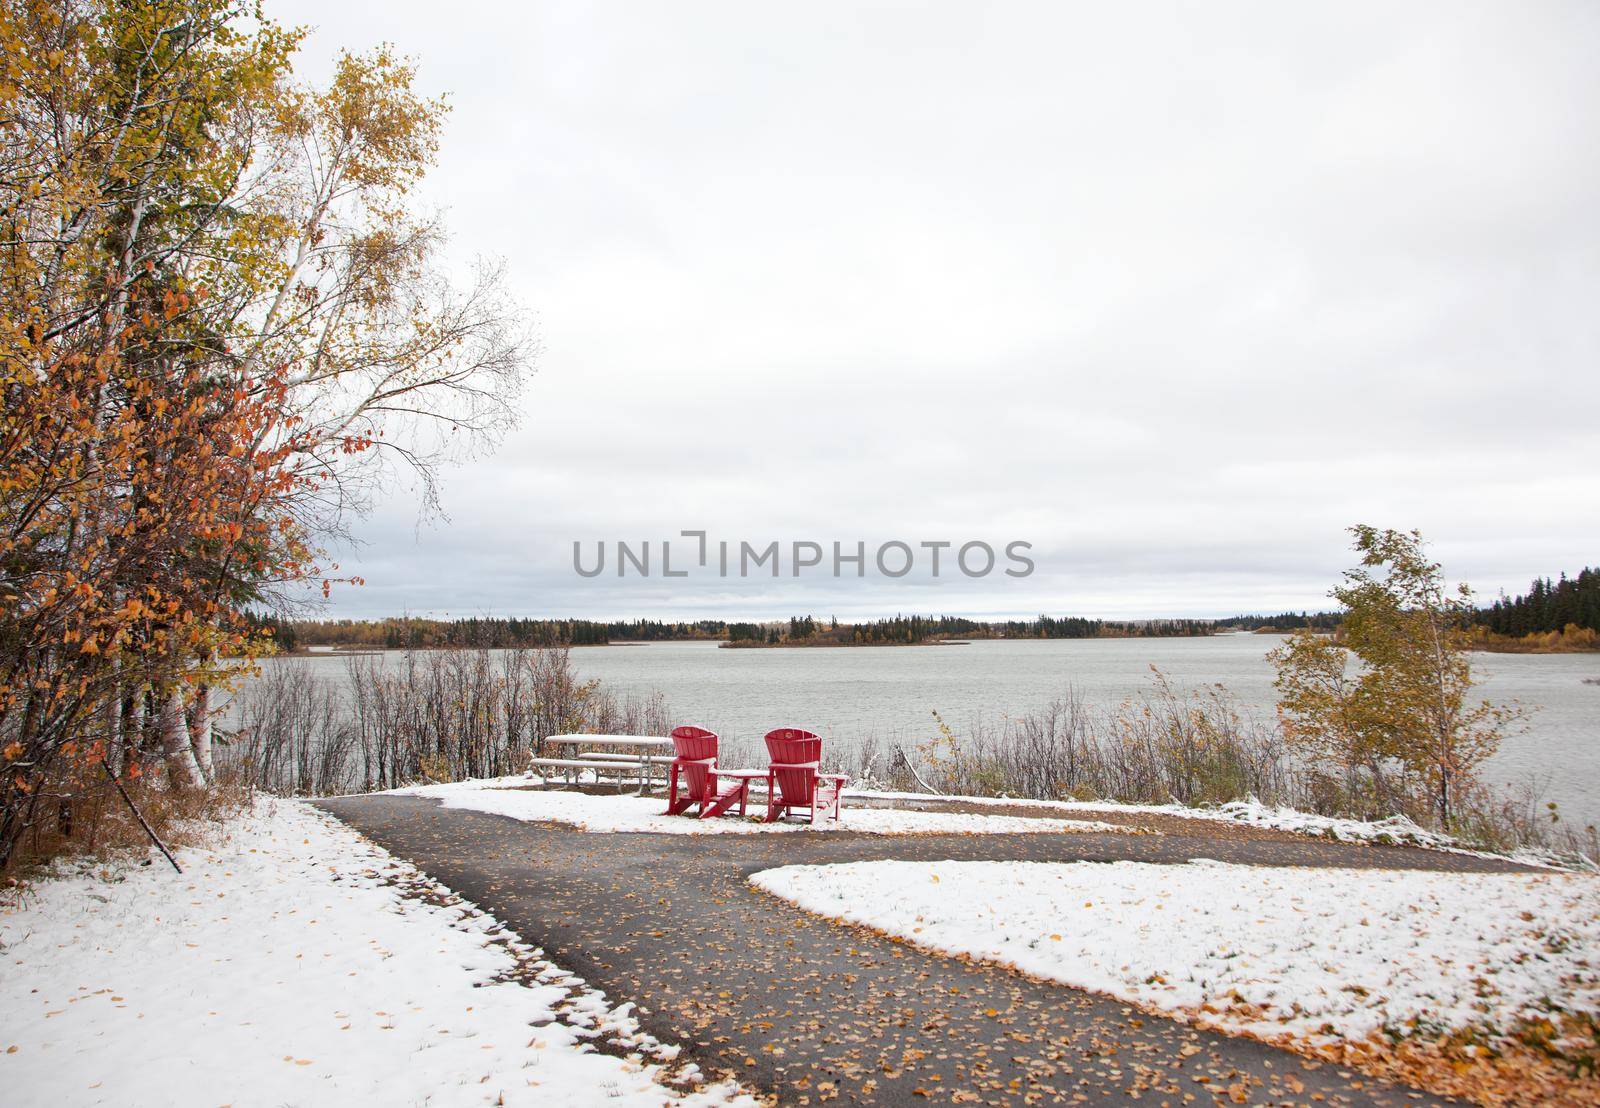 at Astotin Lake in Alberta, two red adirondack chairs celebrating Canada's 150th sit at the end of a path and overlook a lake in winter